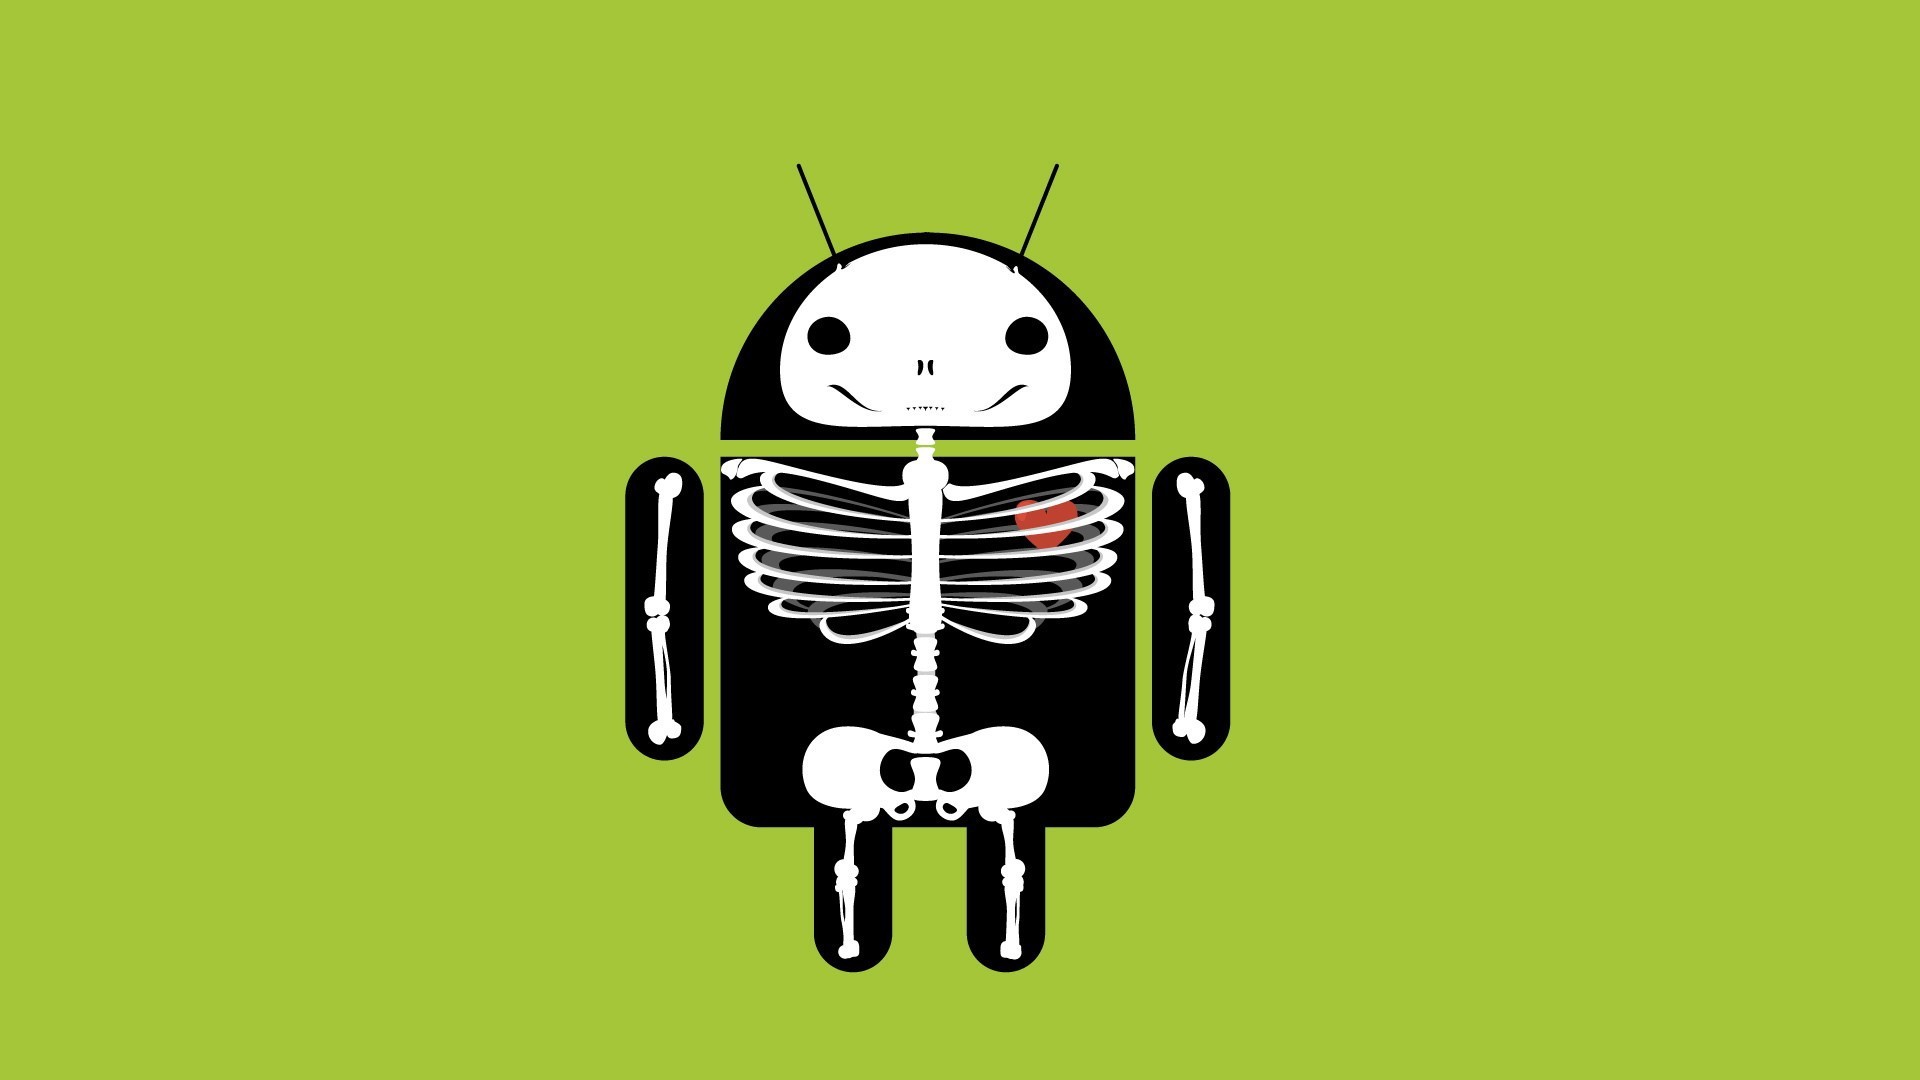 Download High quality android bones 1.0 Android wallpaper / 1920x1080